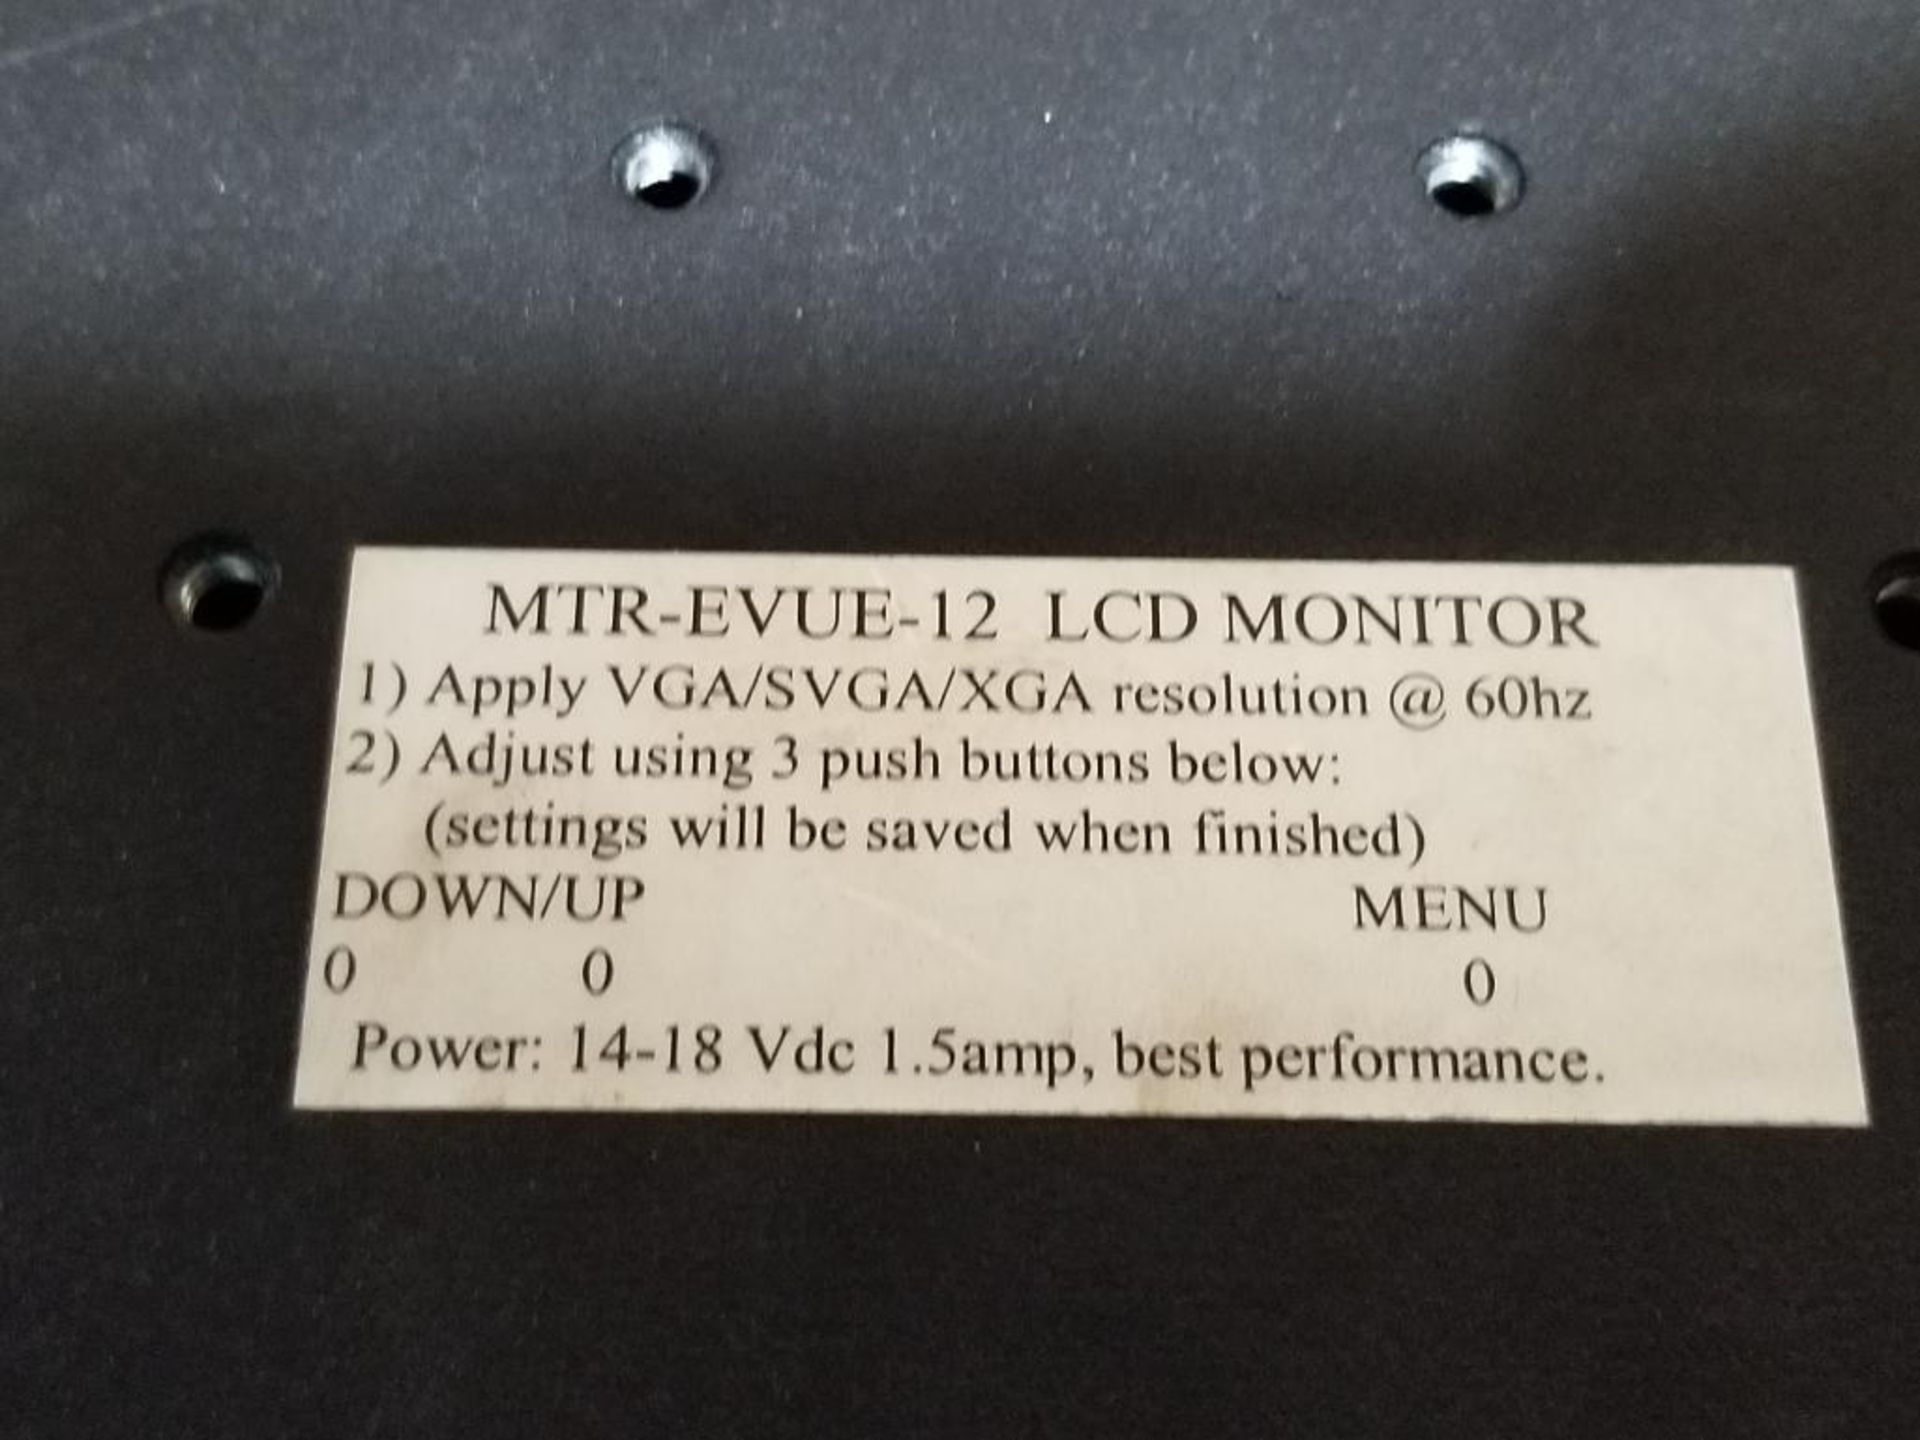 Earth LCD industrial monitor. Part number MTR-EVUE-12. - Image 4 of 6